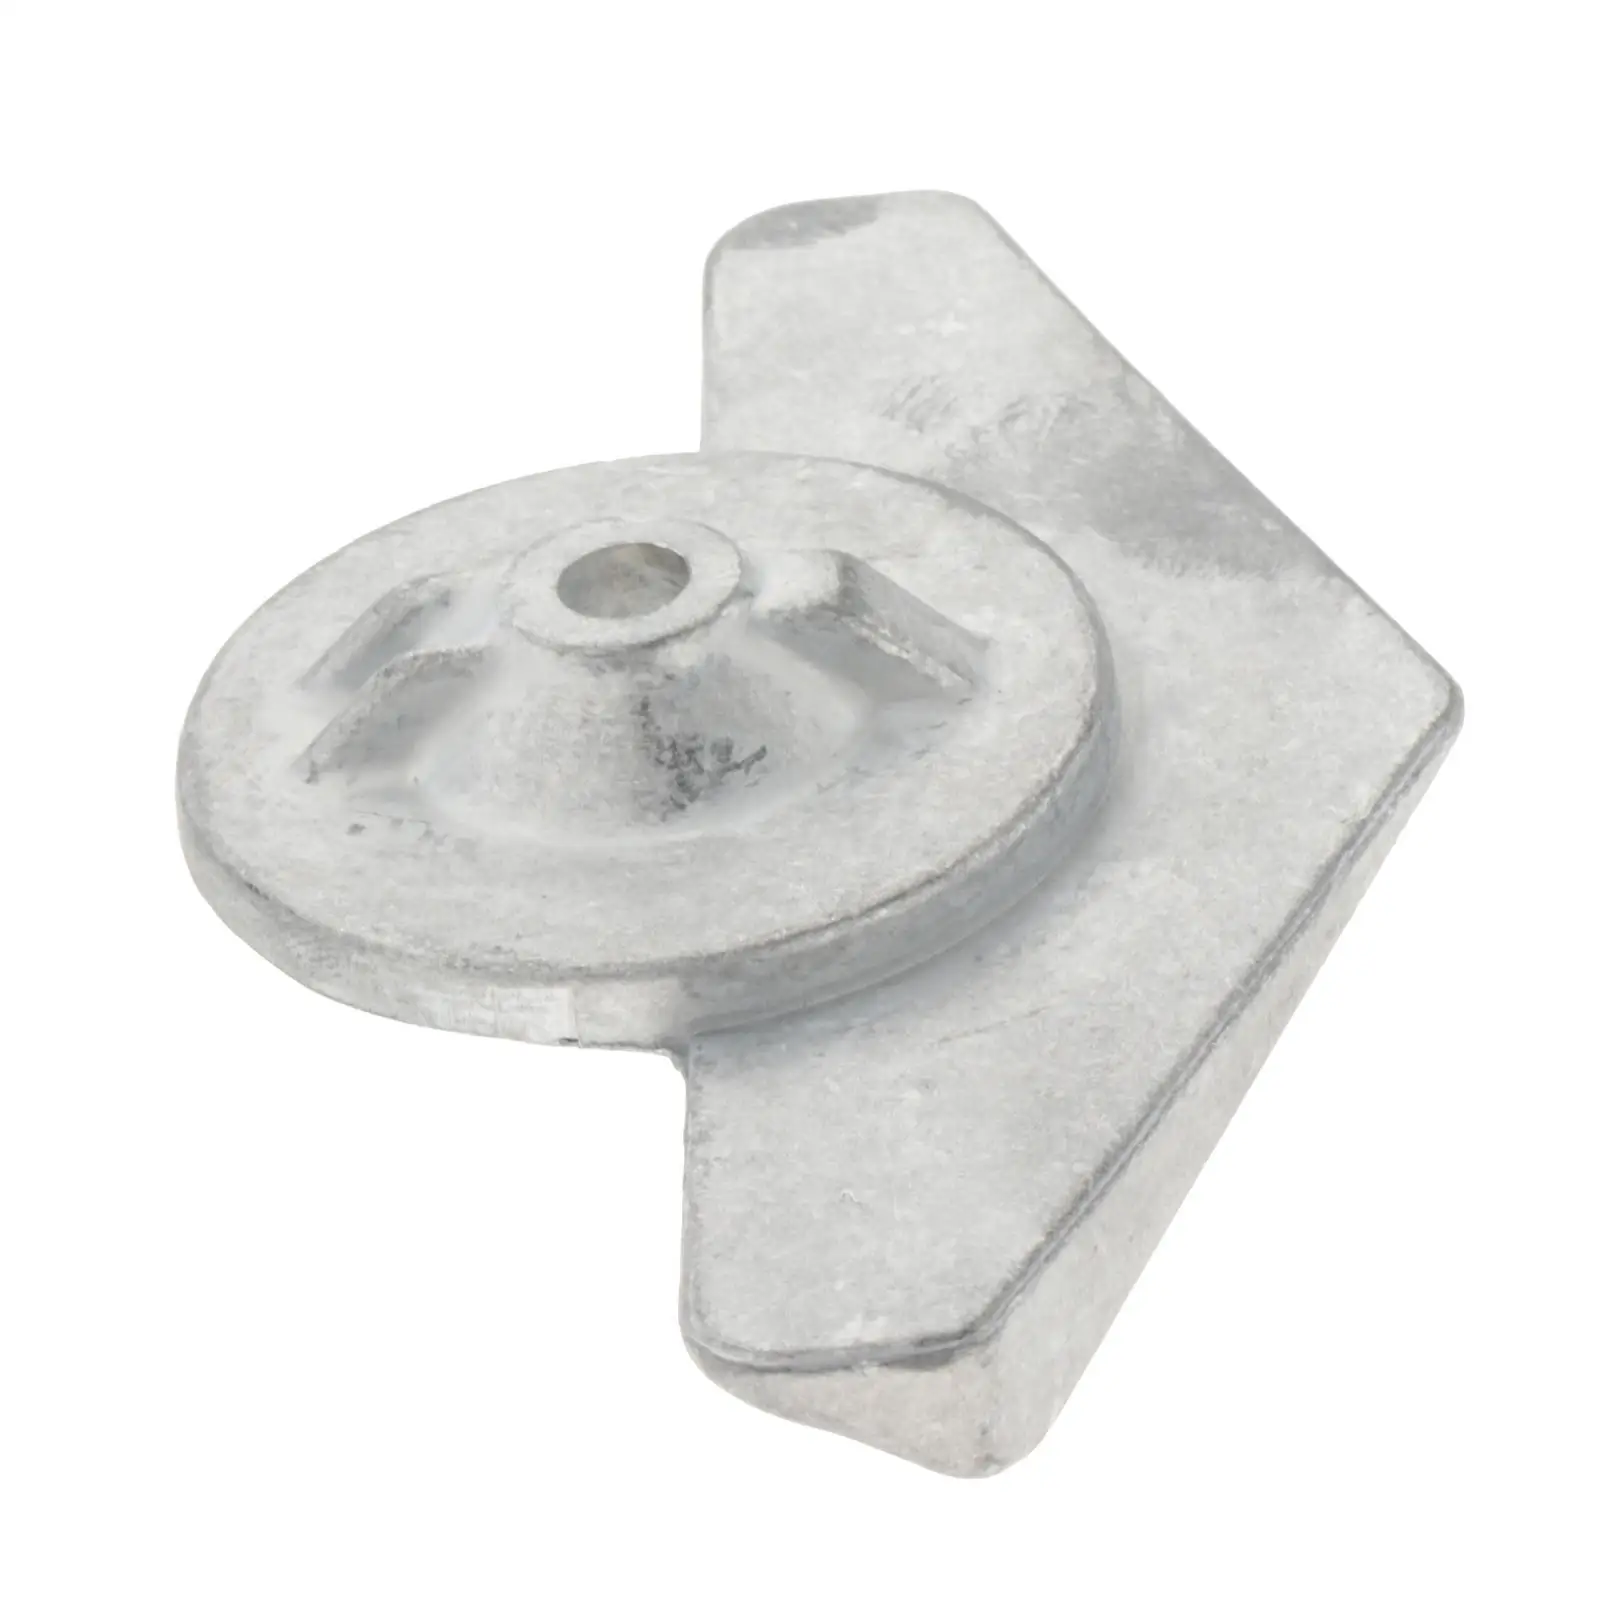 Anode Fit for Yamaha Outboard Motor F9.9 F15 15HP 2 Stroke & 4 Stroke Durable 683-45251-00 6E8-45251-02 Spare Parts